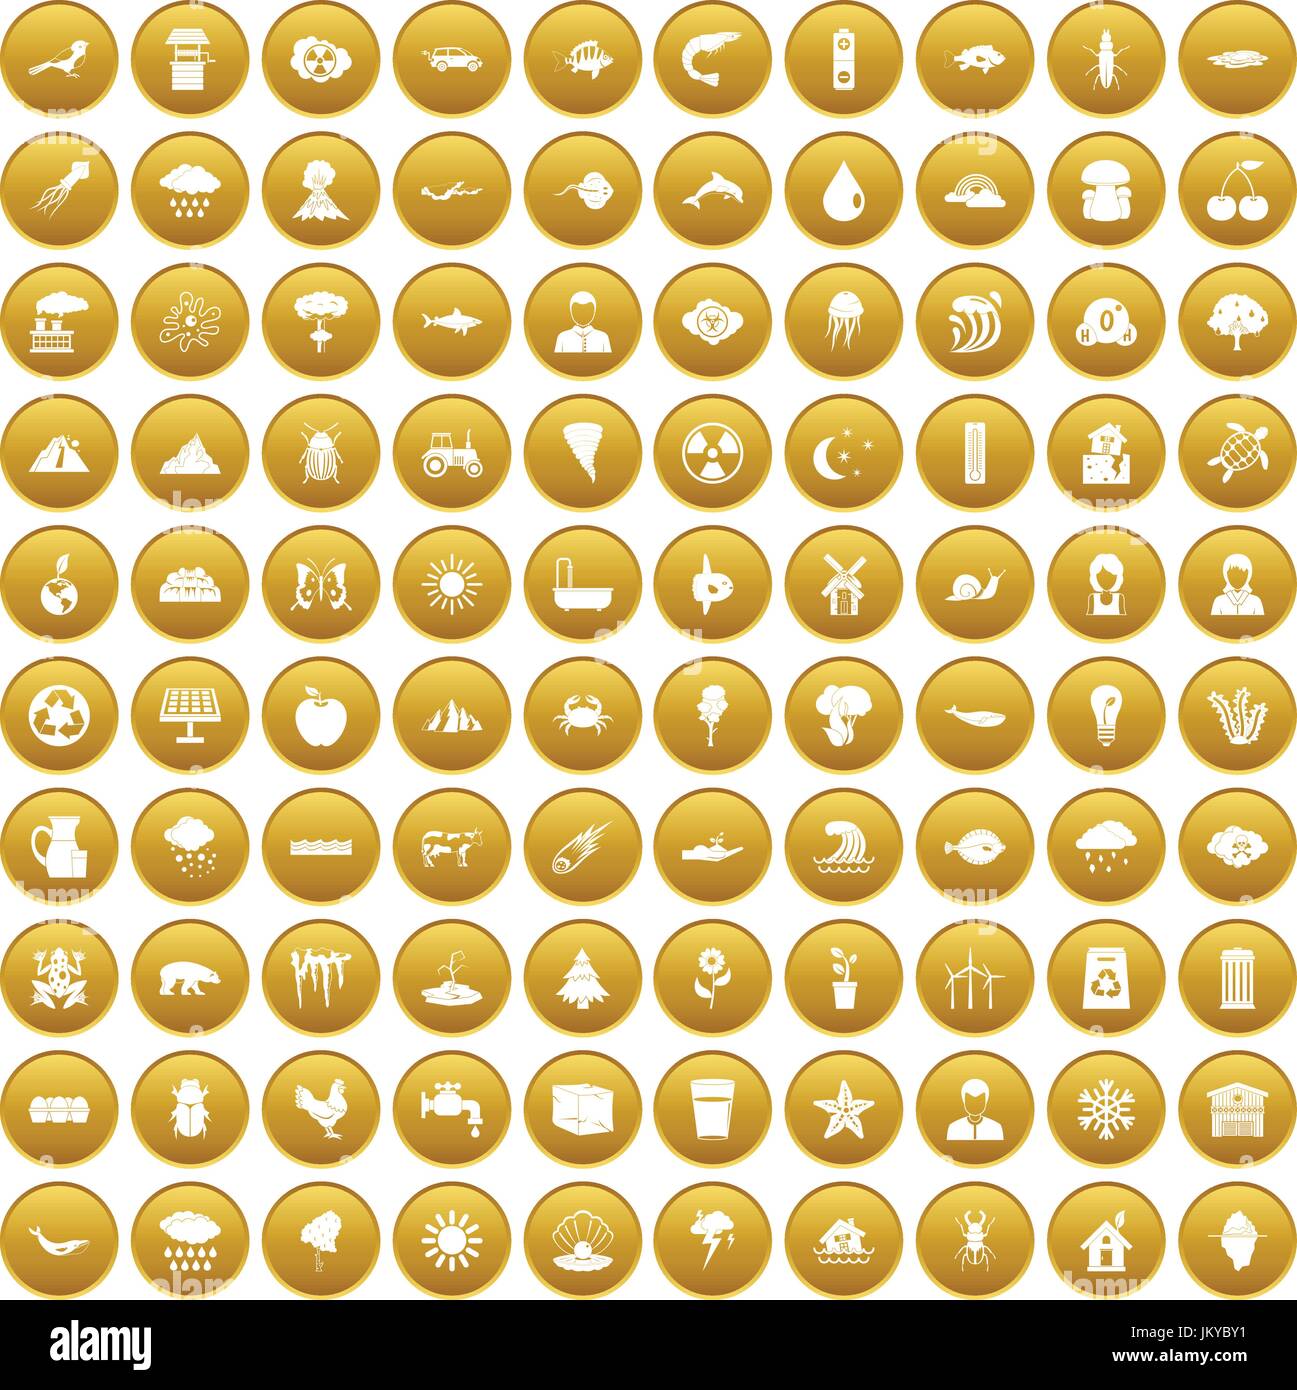 100 earth icons set gold Stock Vector